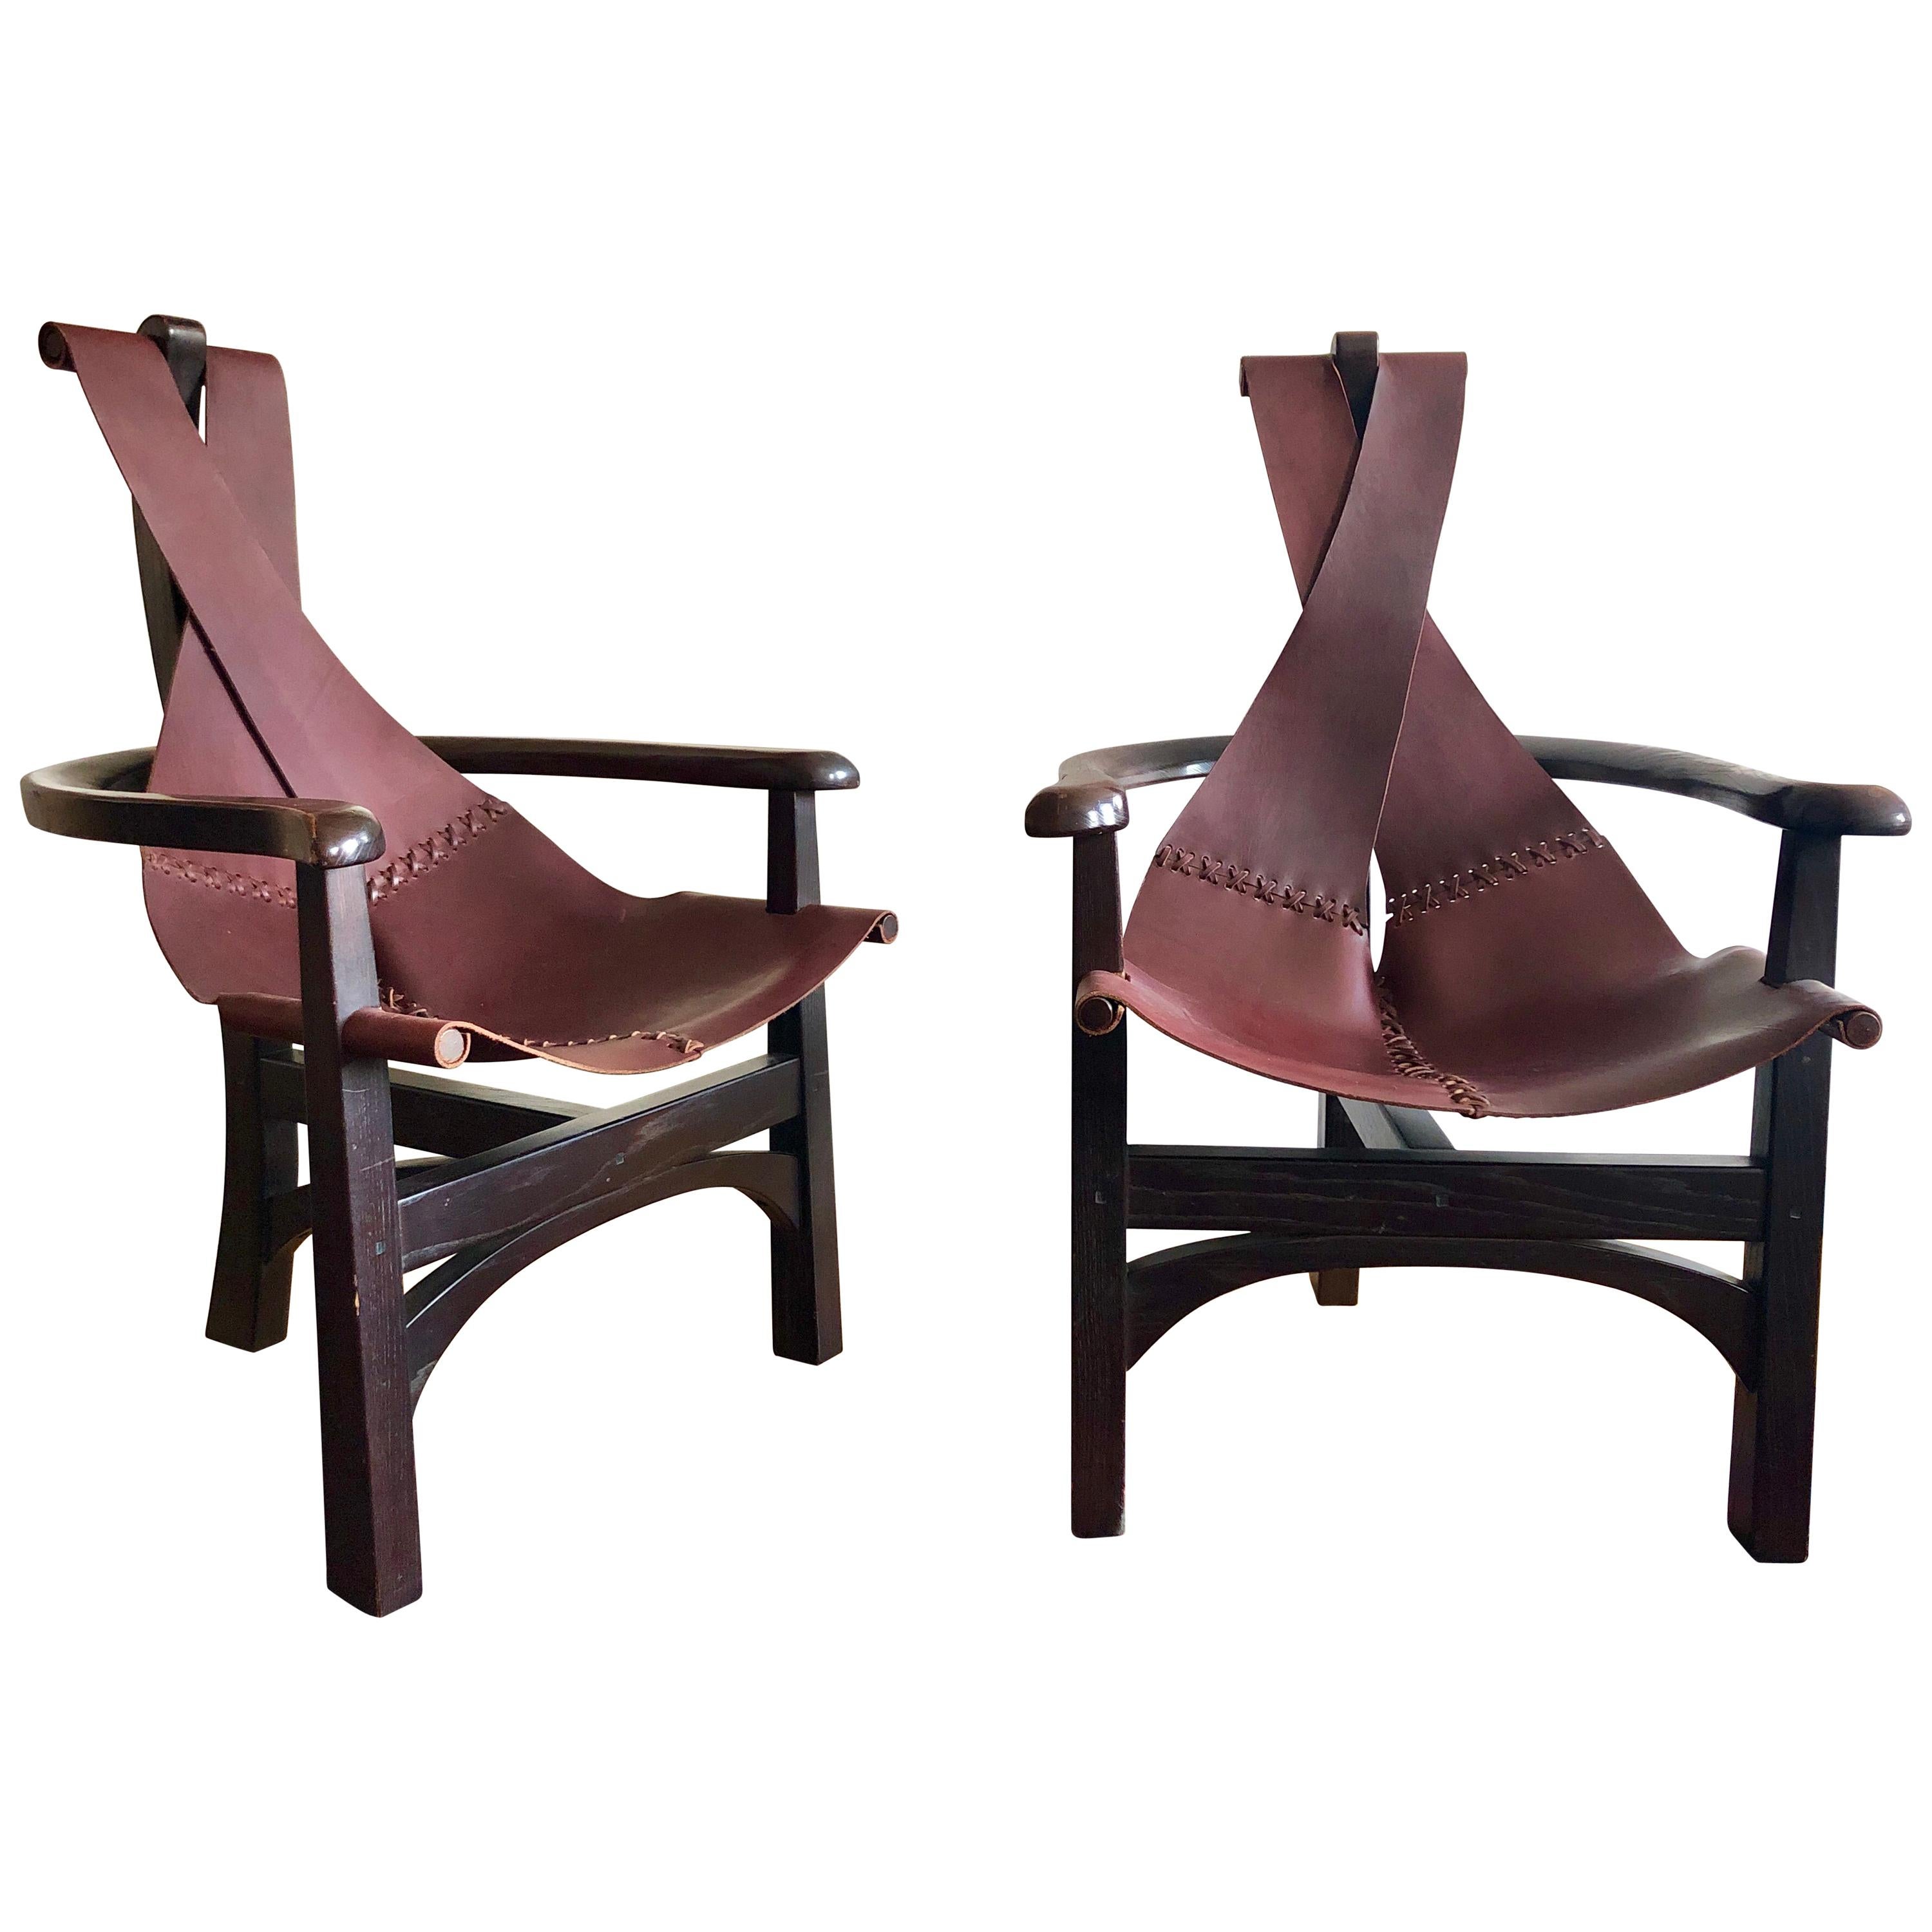 Pair of California Studio Leather Sling Chairs